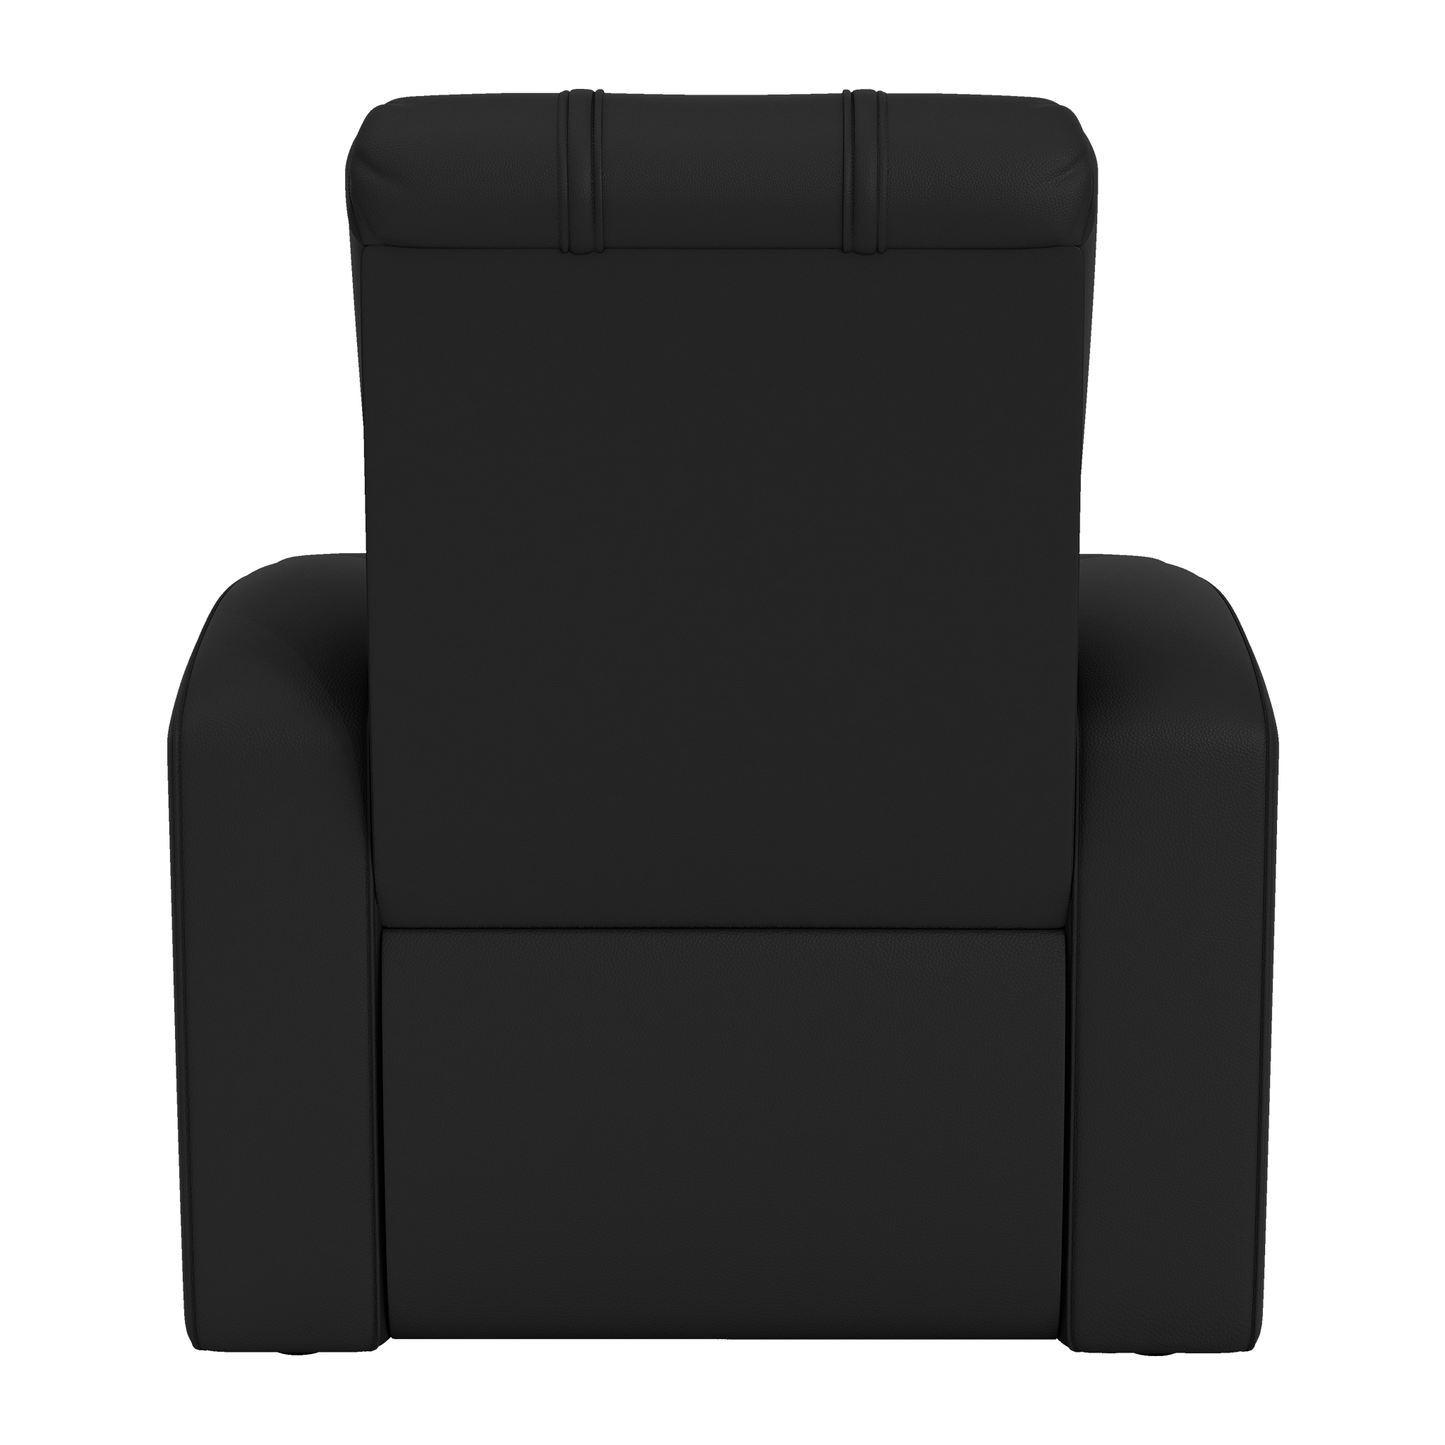 Relax Home Theater Recliner with Philadelphia 76ers Secondary